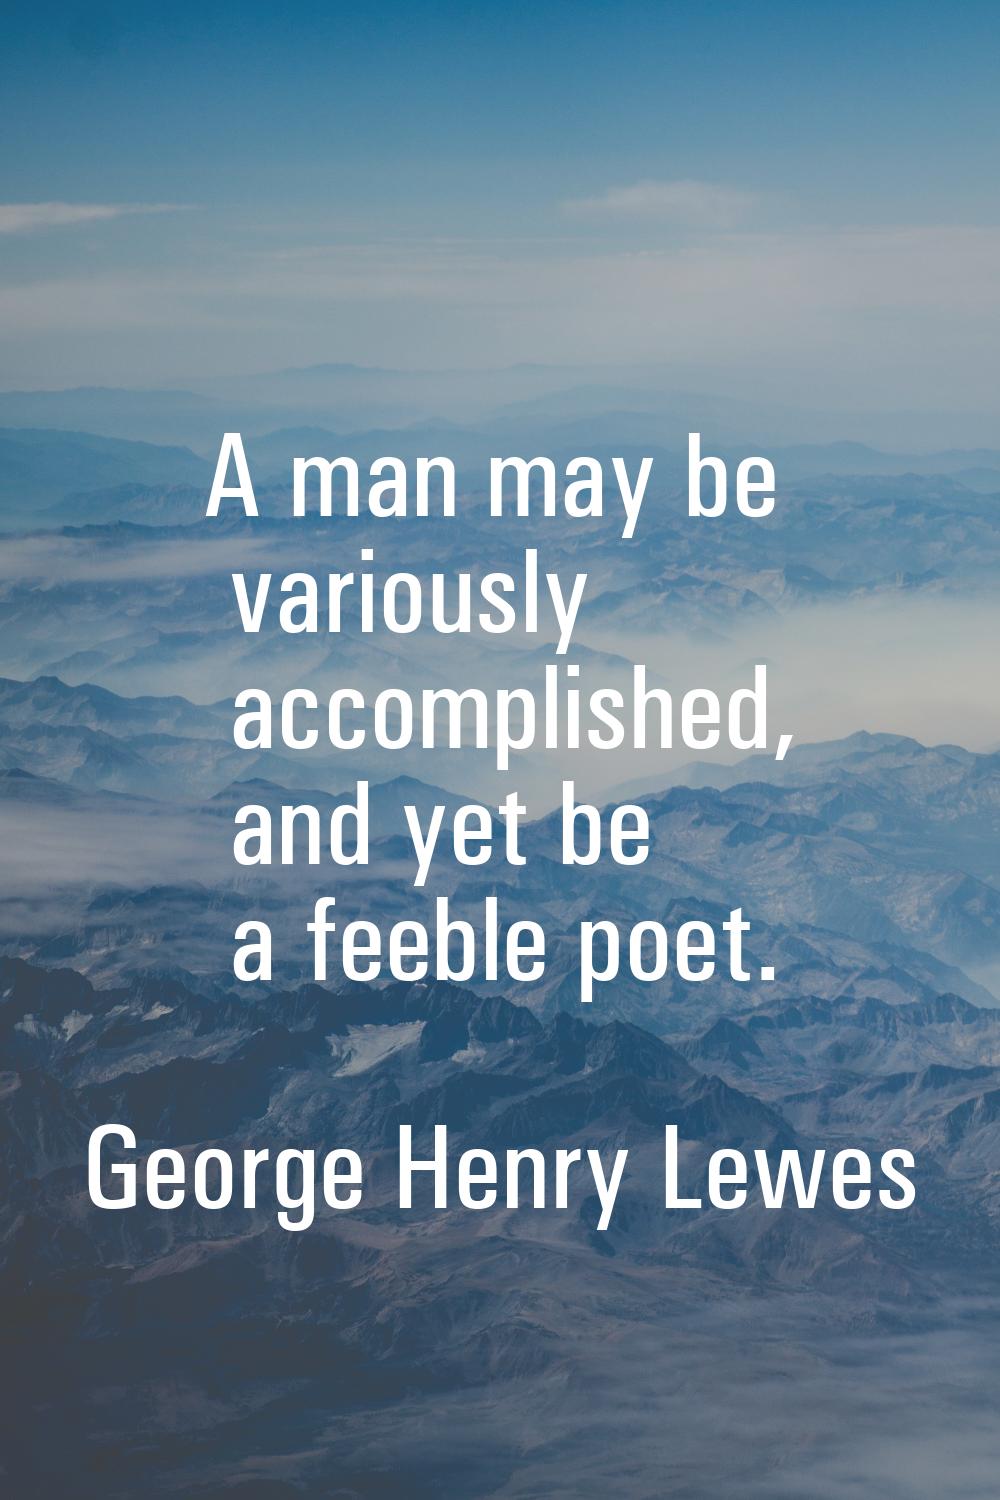 A man may be variously accomplished, and yet be a feeble poet.